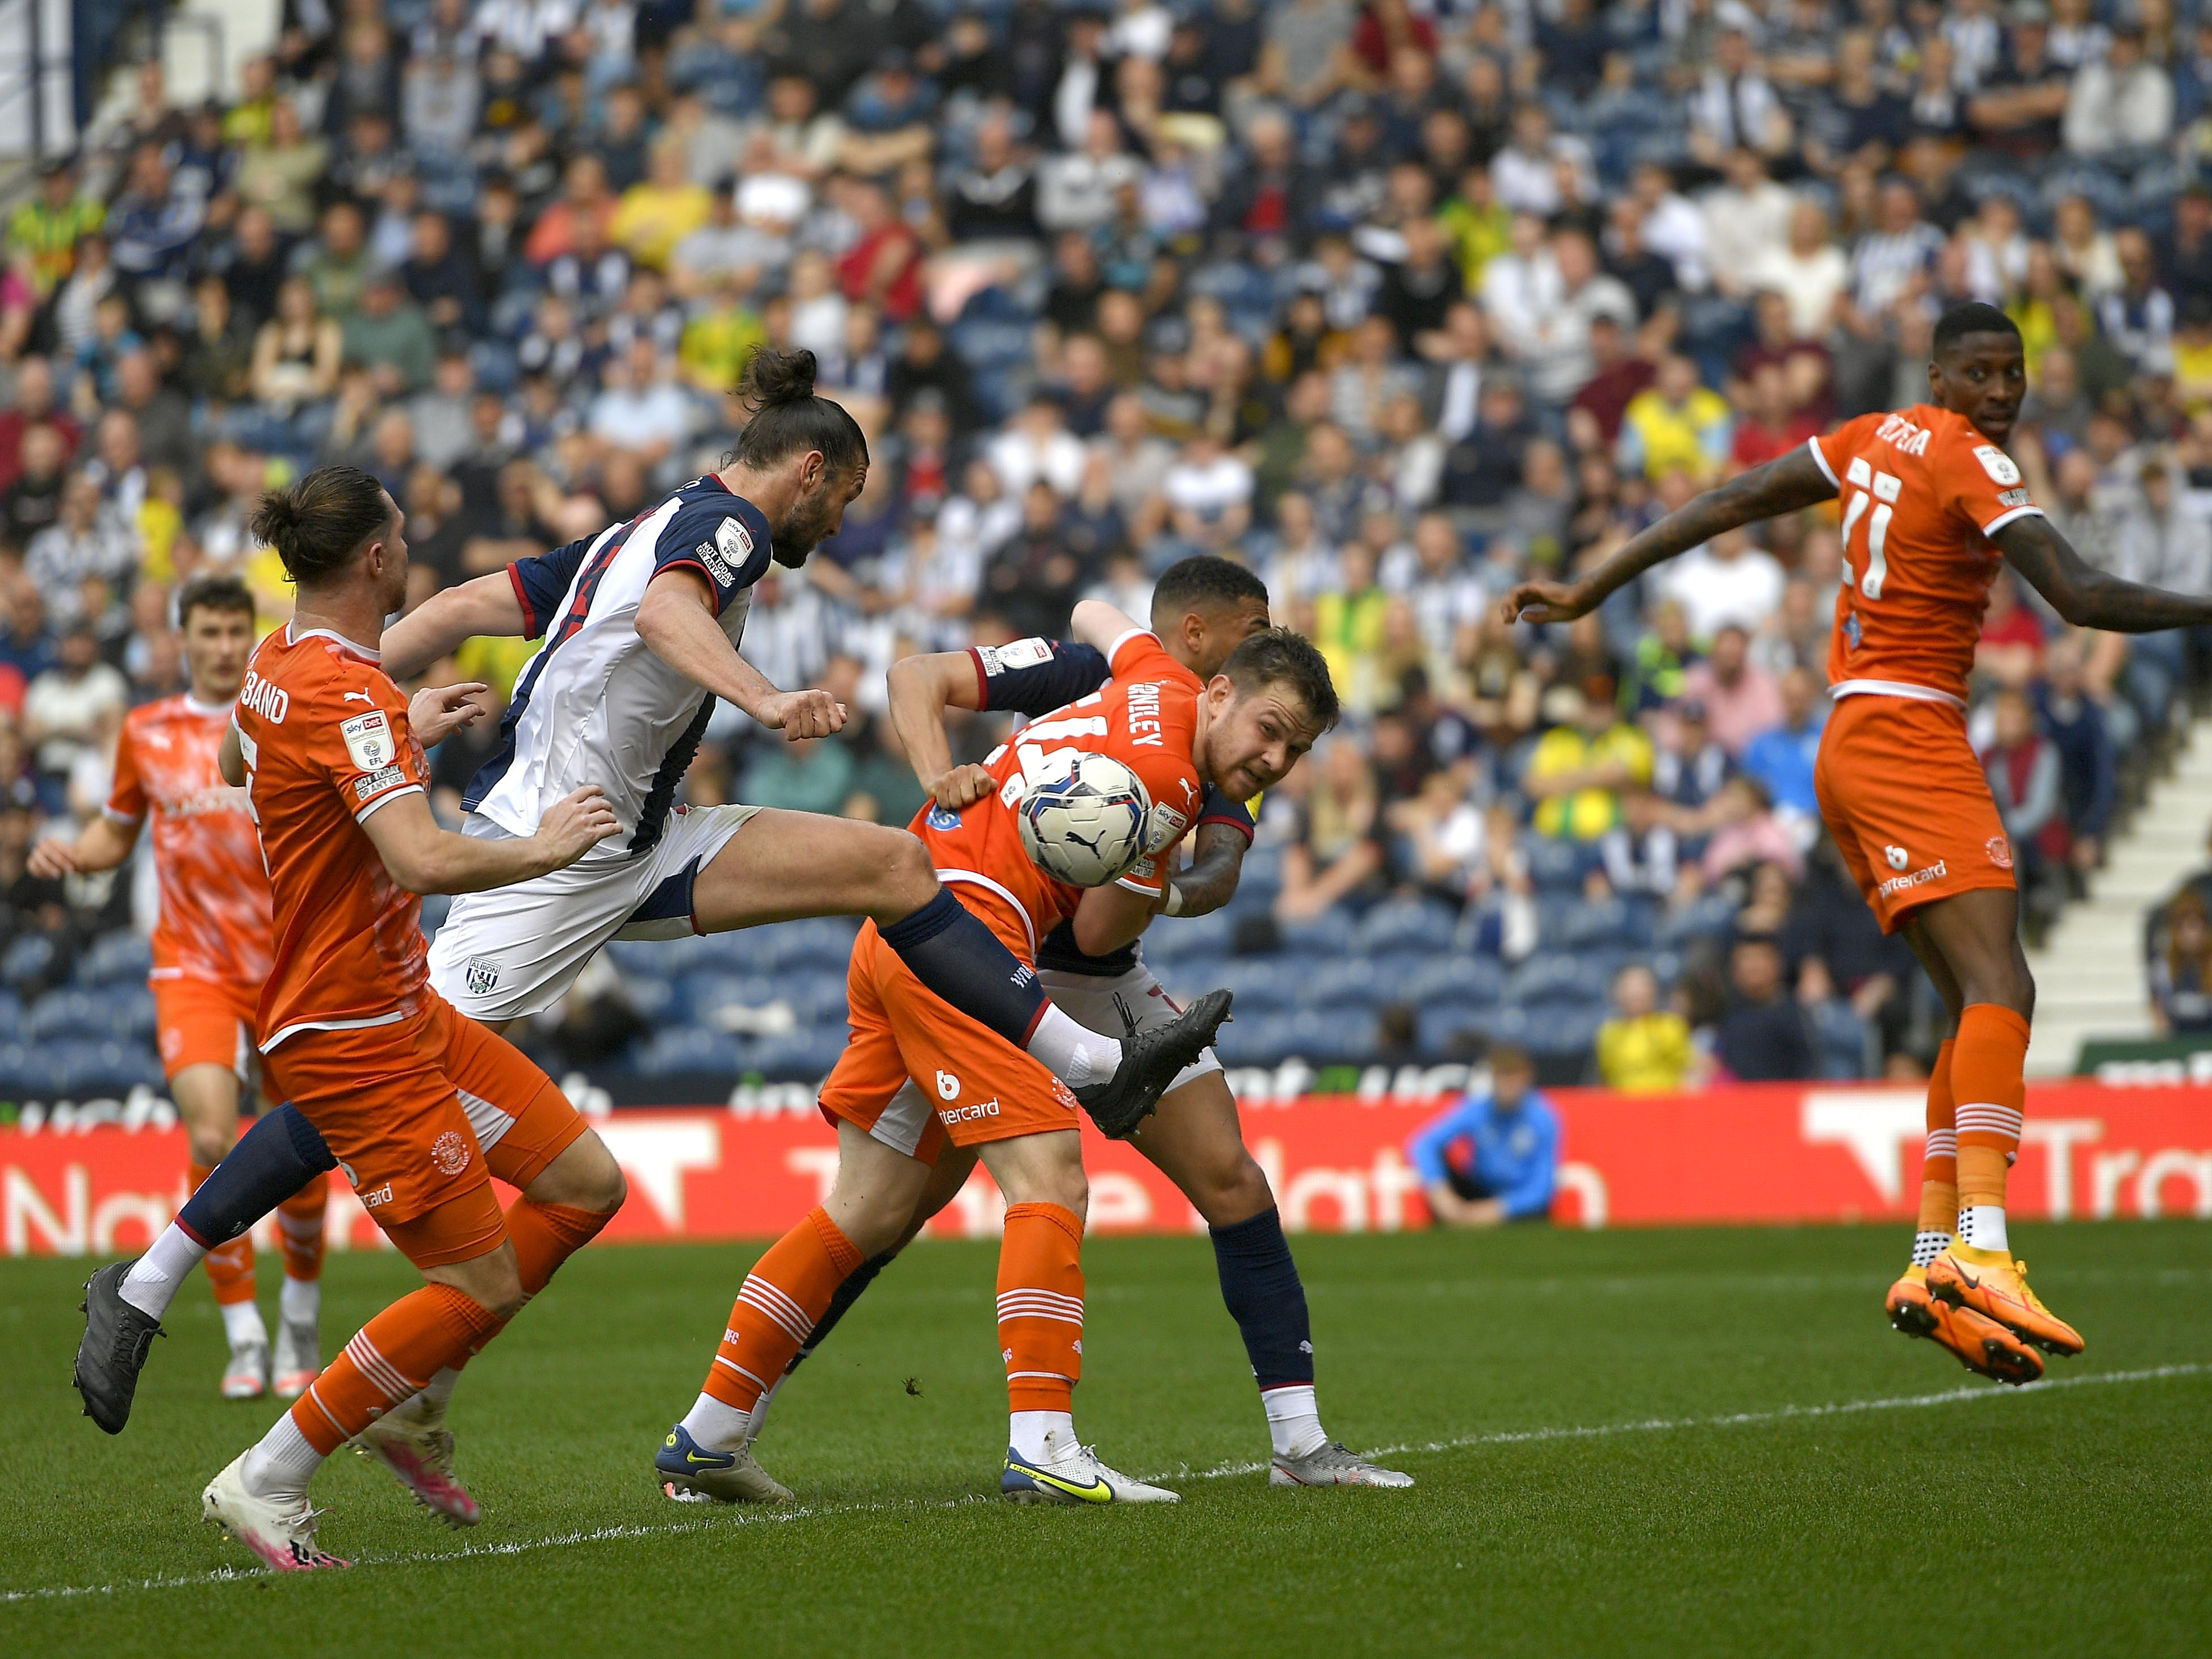 Carroll scores Albion's opening goal against Blackpool